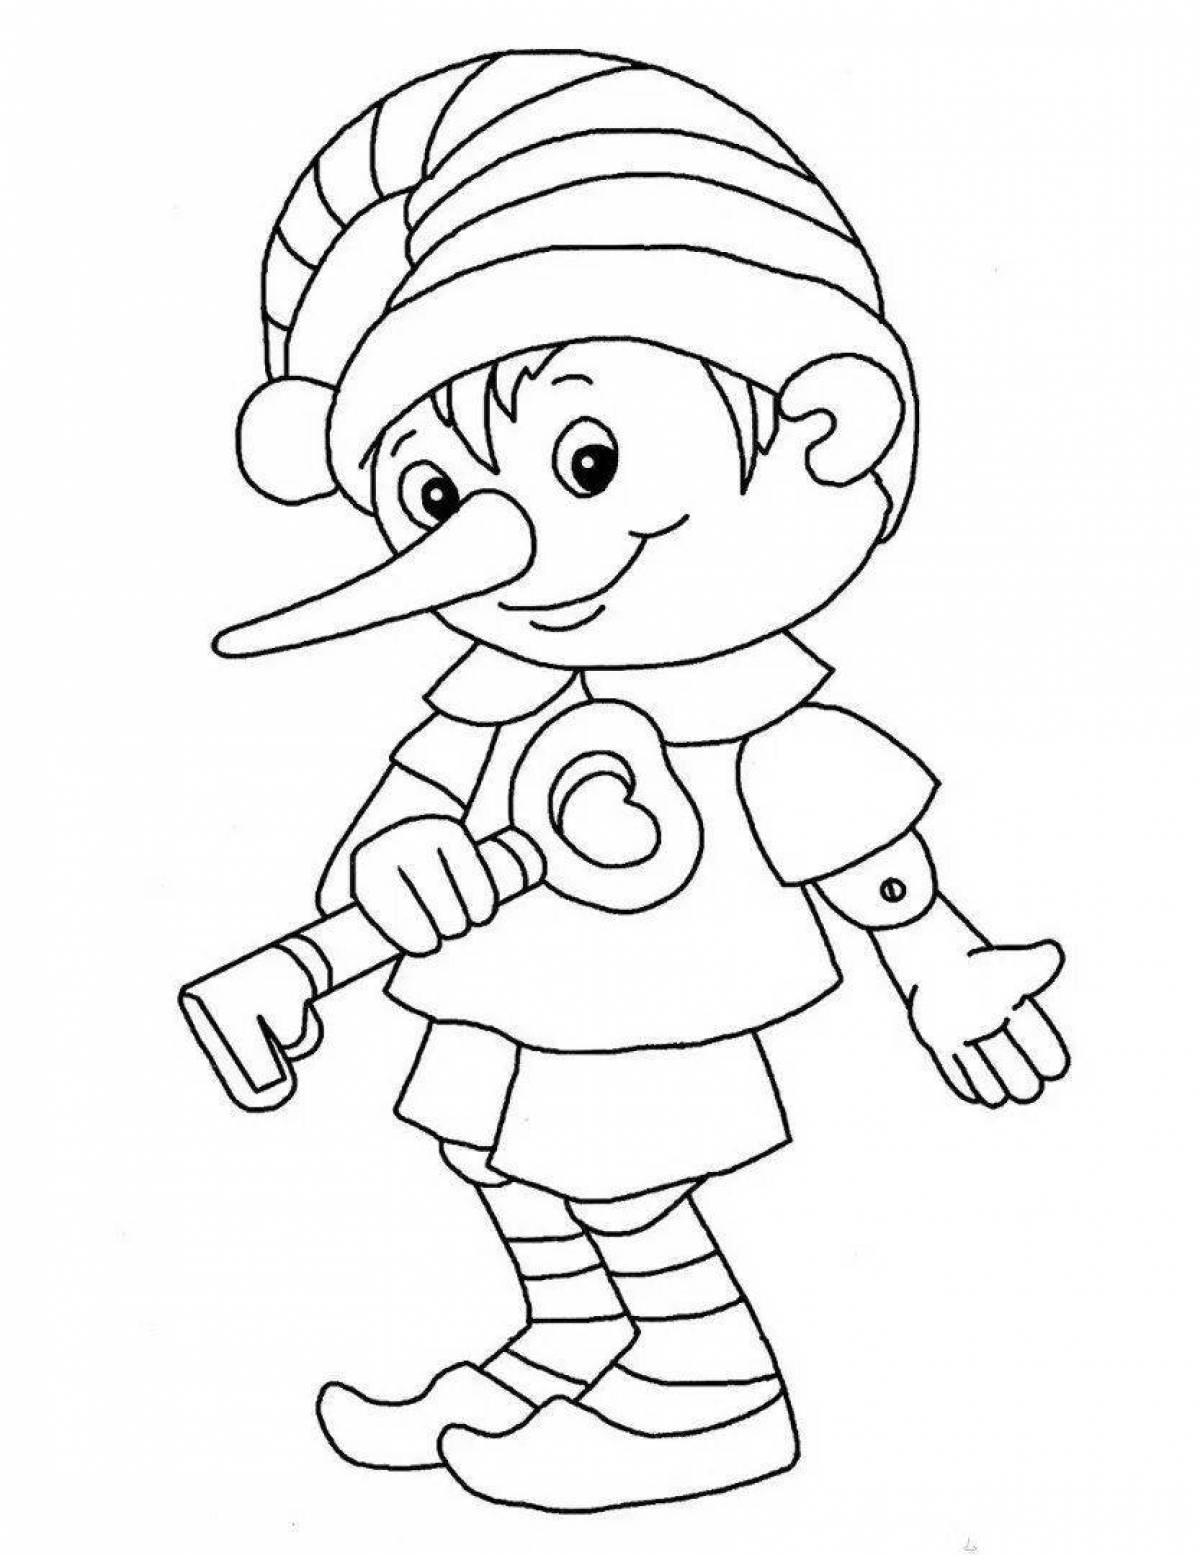 Exalted coloring pages heroes of fairy tales for 6 7 years